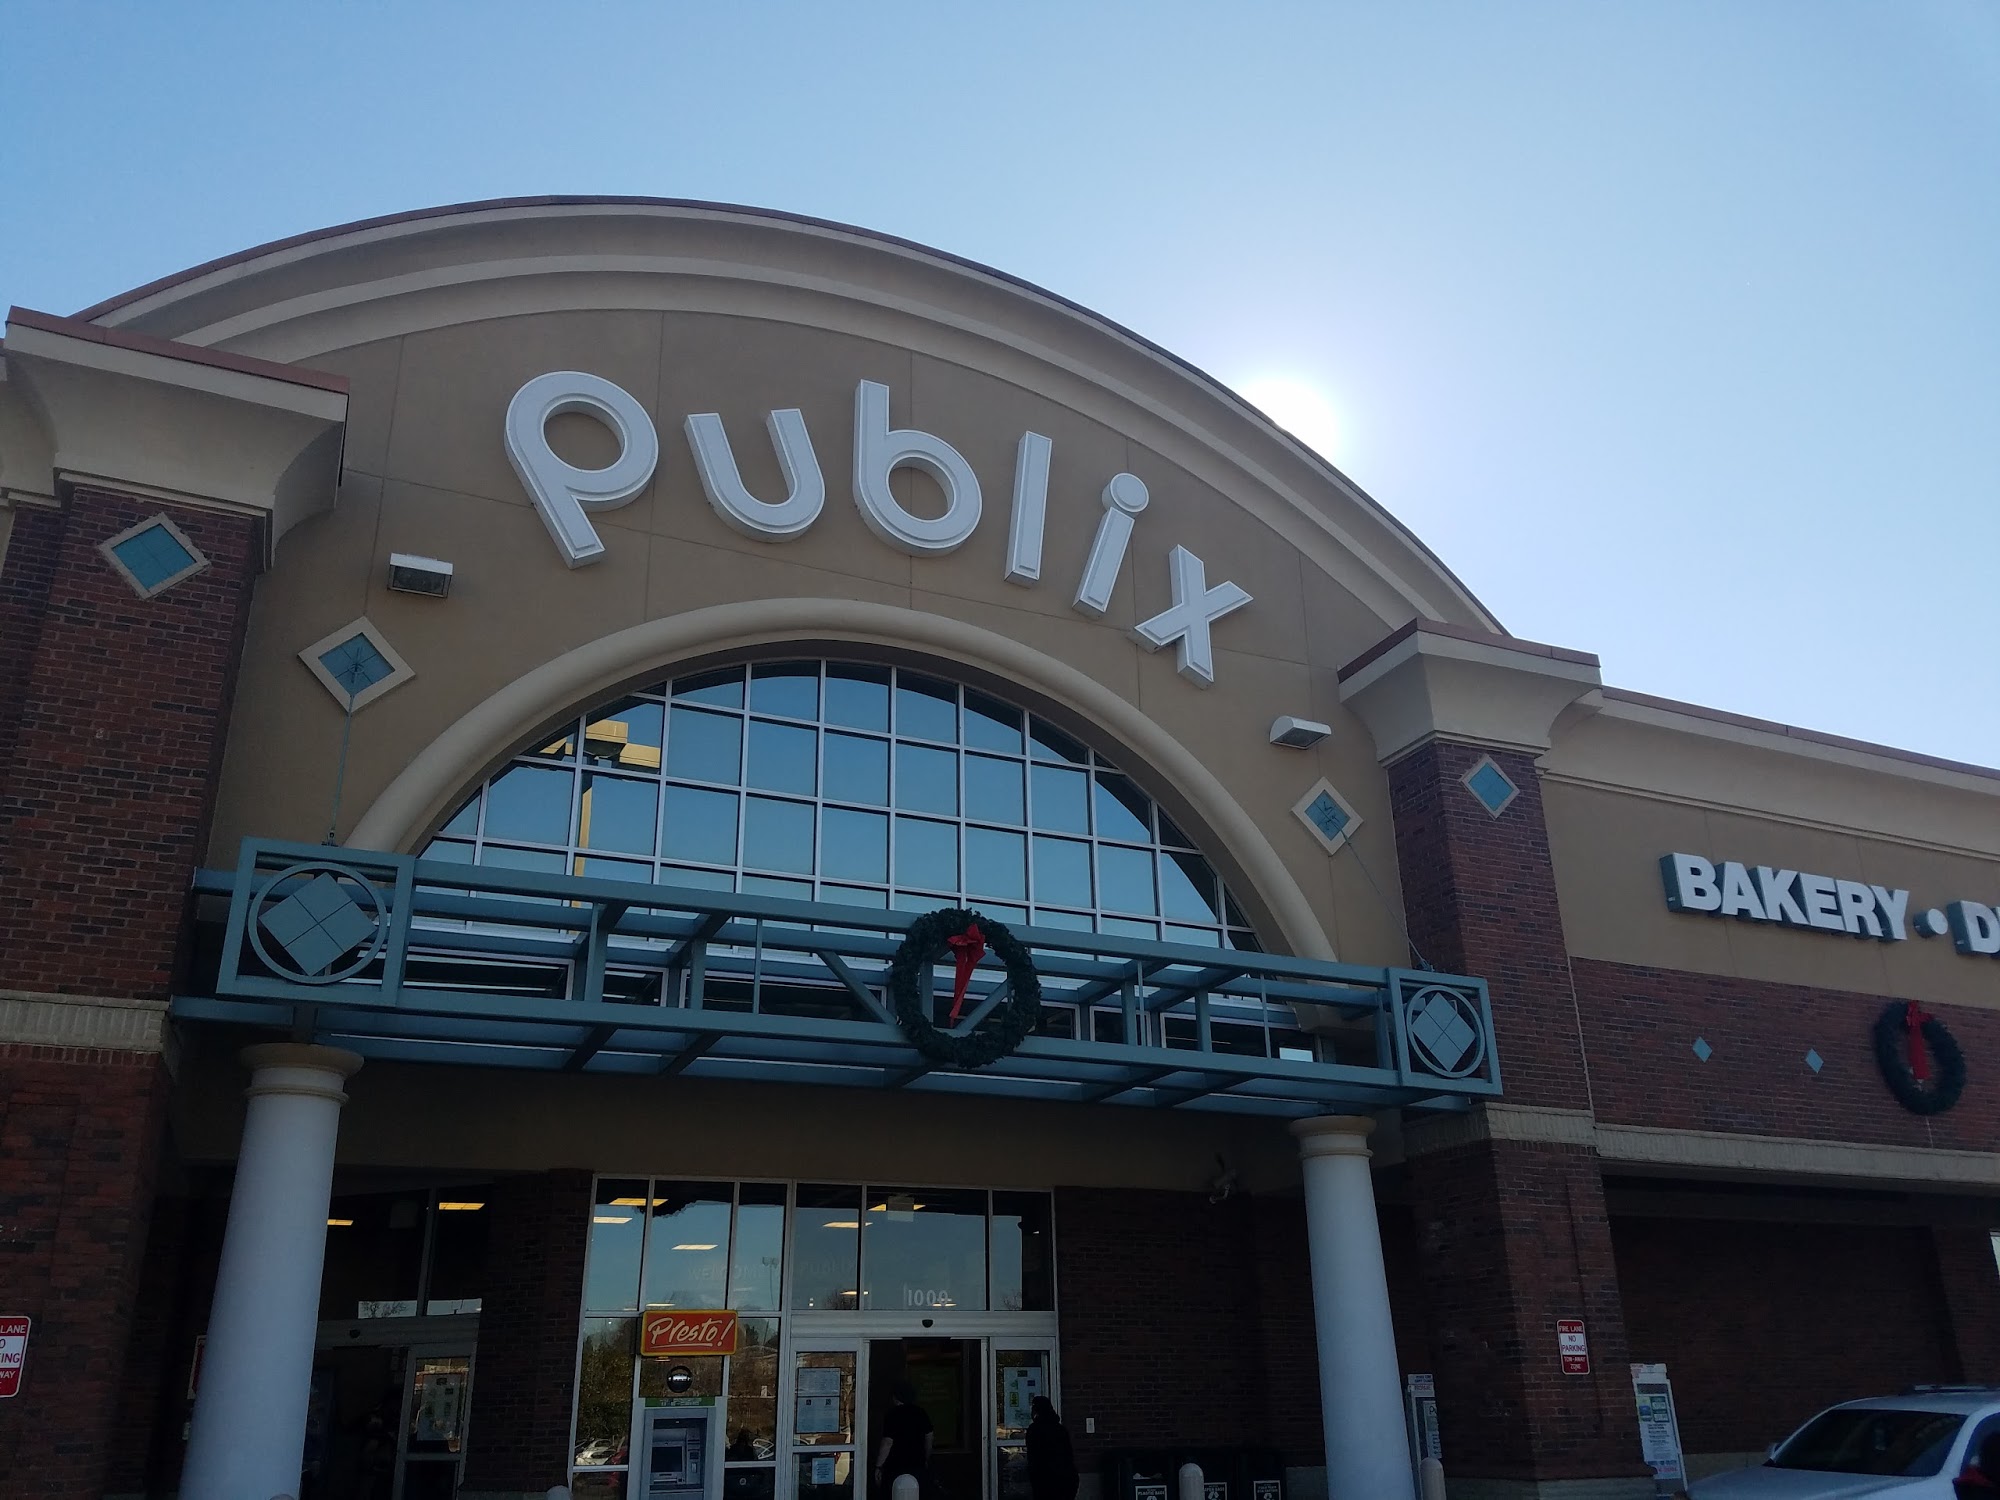 Publix Pharmacy at McGinnis Crossing